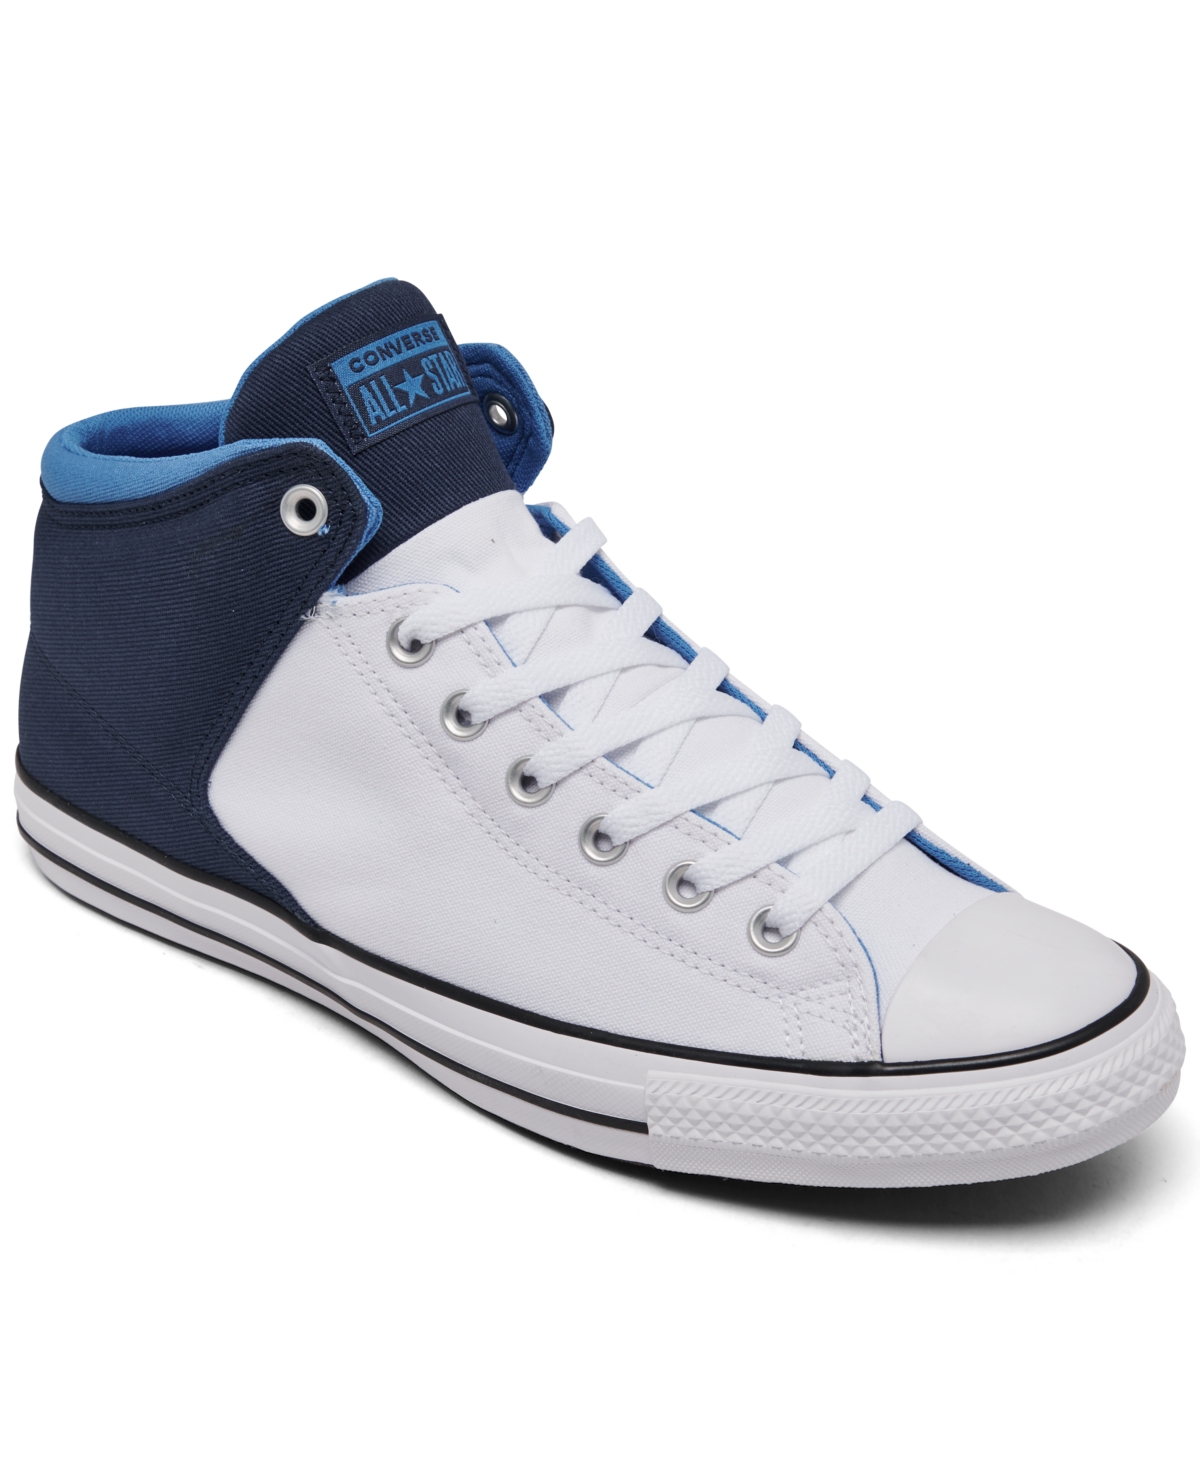 Men's Chuck Taylor All Star Street High Top Casual Sneakers from Finish Line - White, Navy Blue